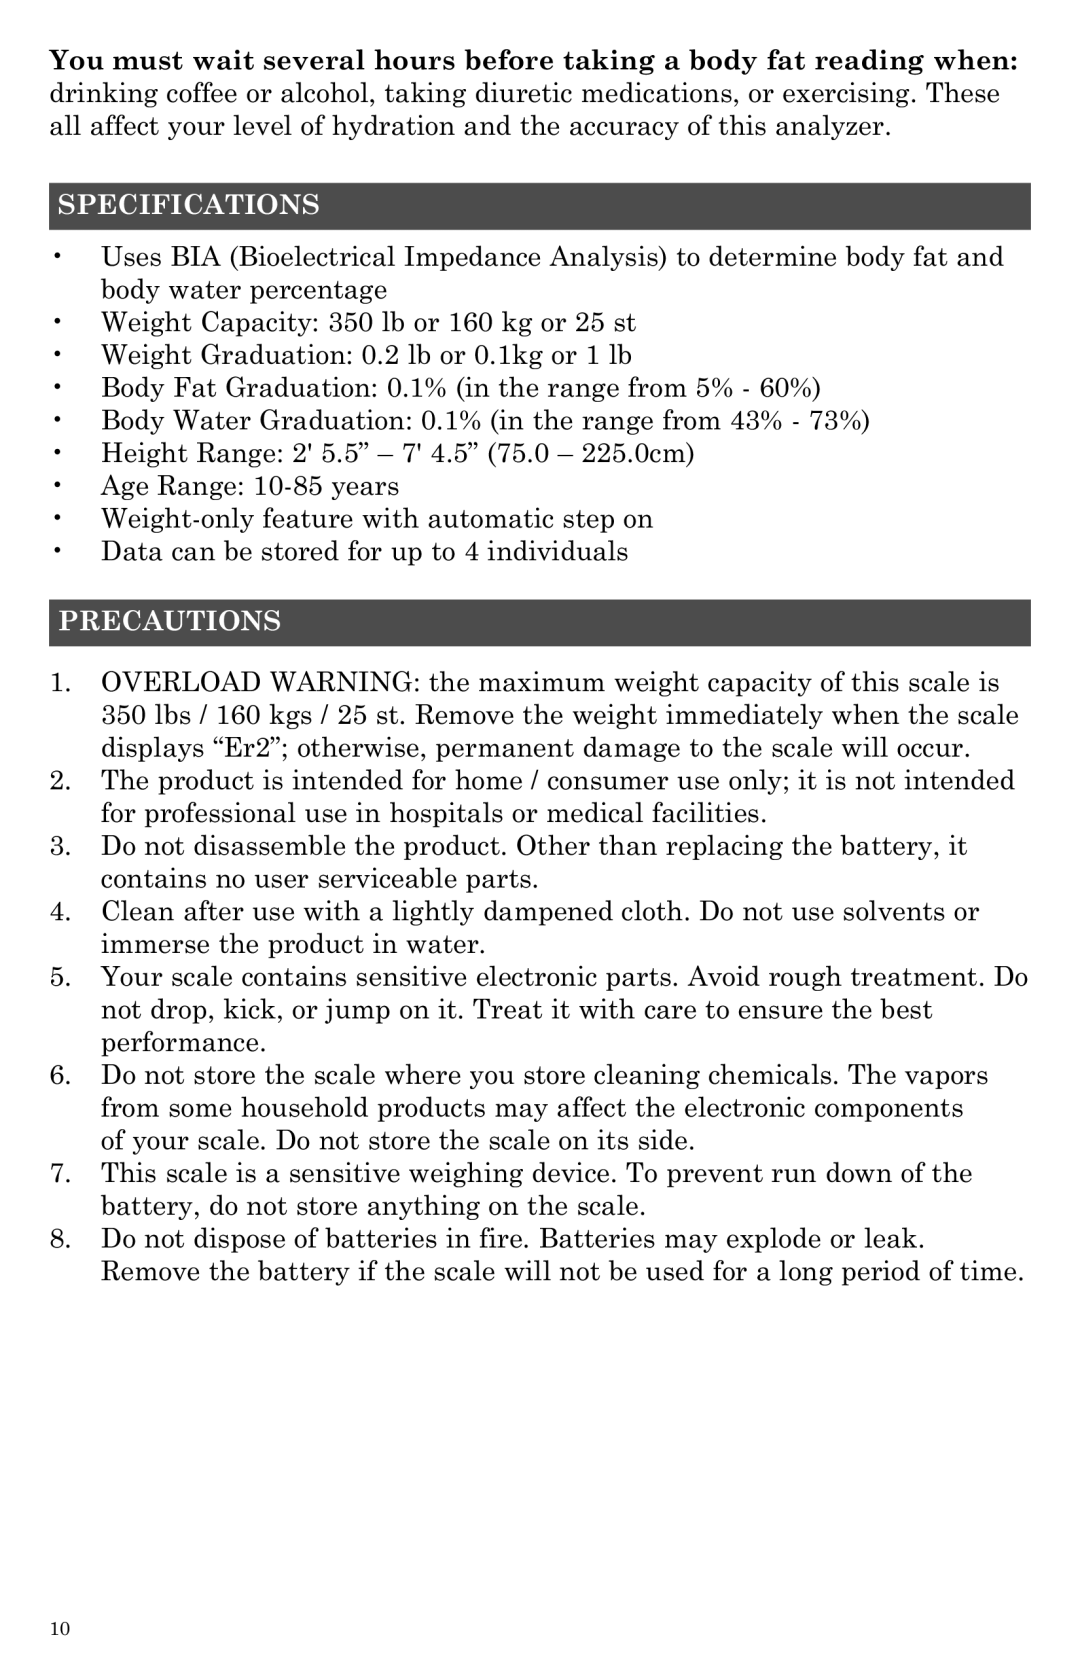 Taylor 5754 instruction manual Specifications, Precautions 